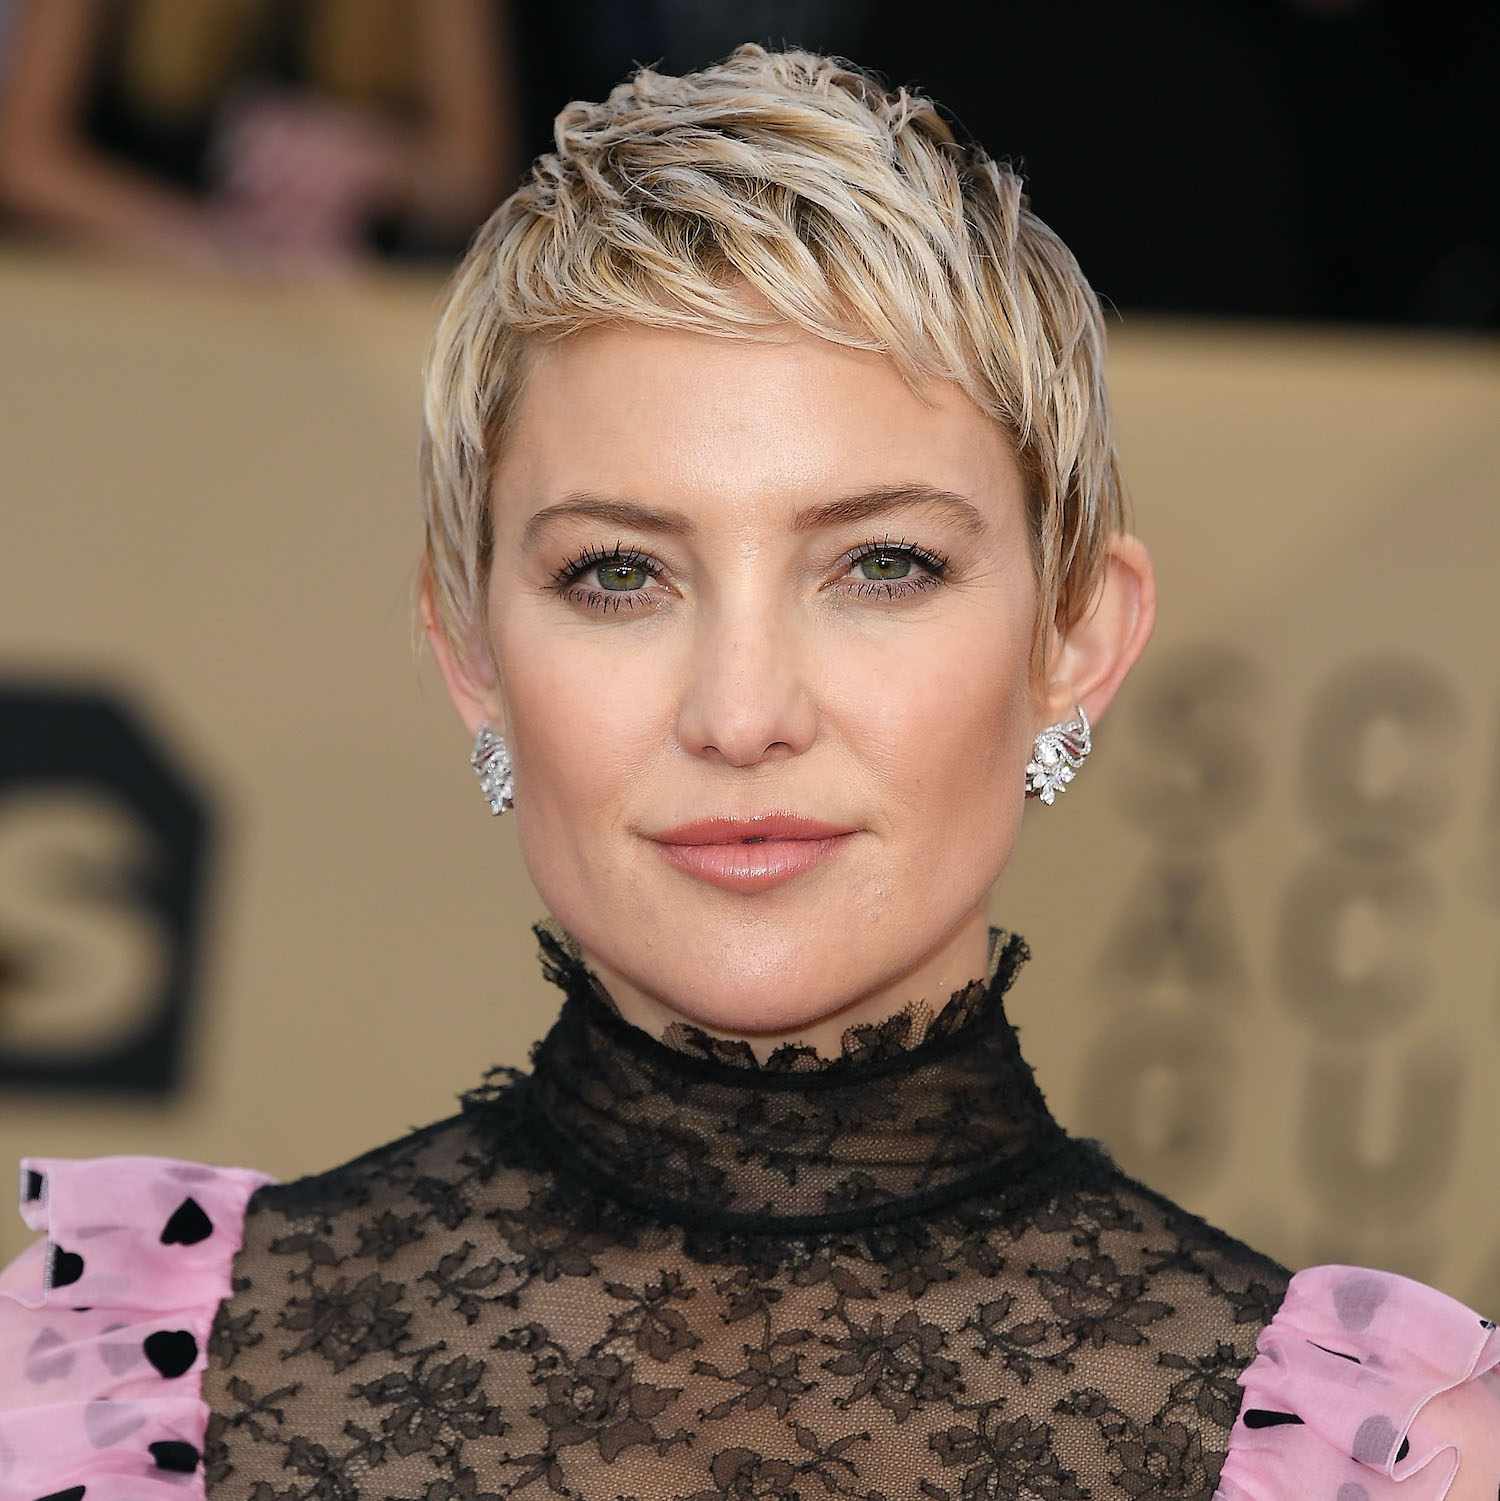 Kate Hudson wears a blonde pixie cut with baby bangs